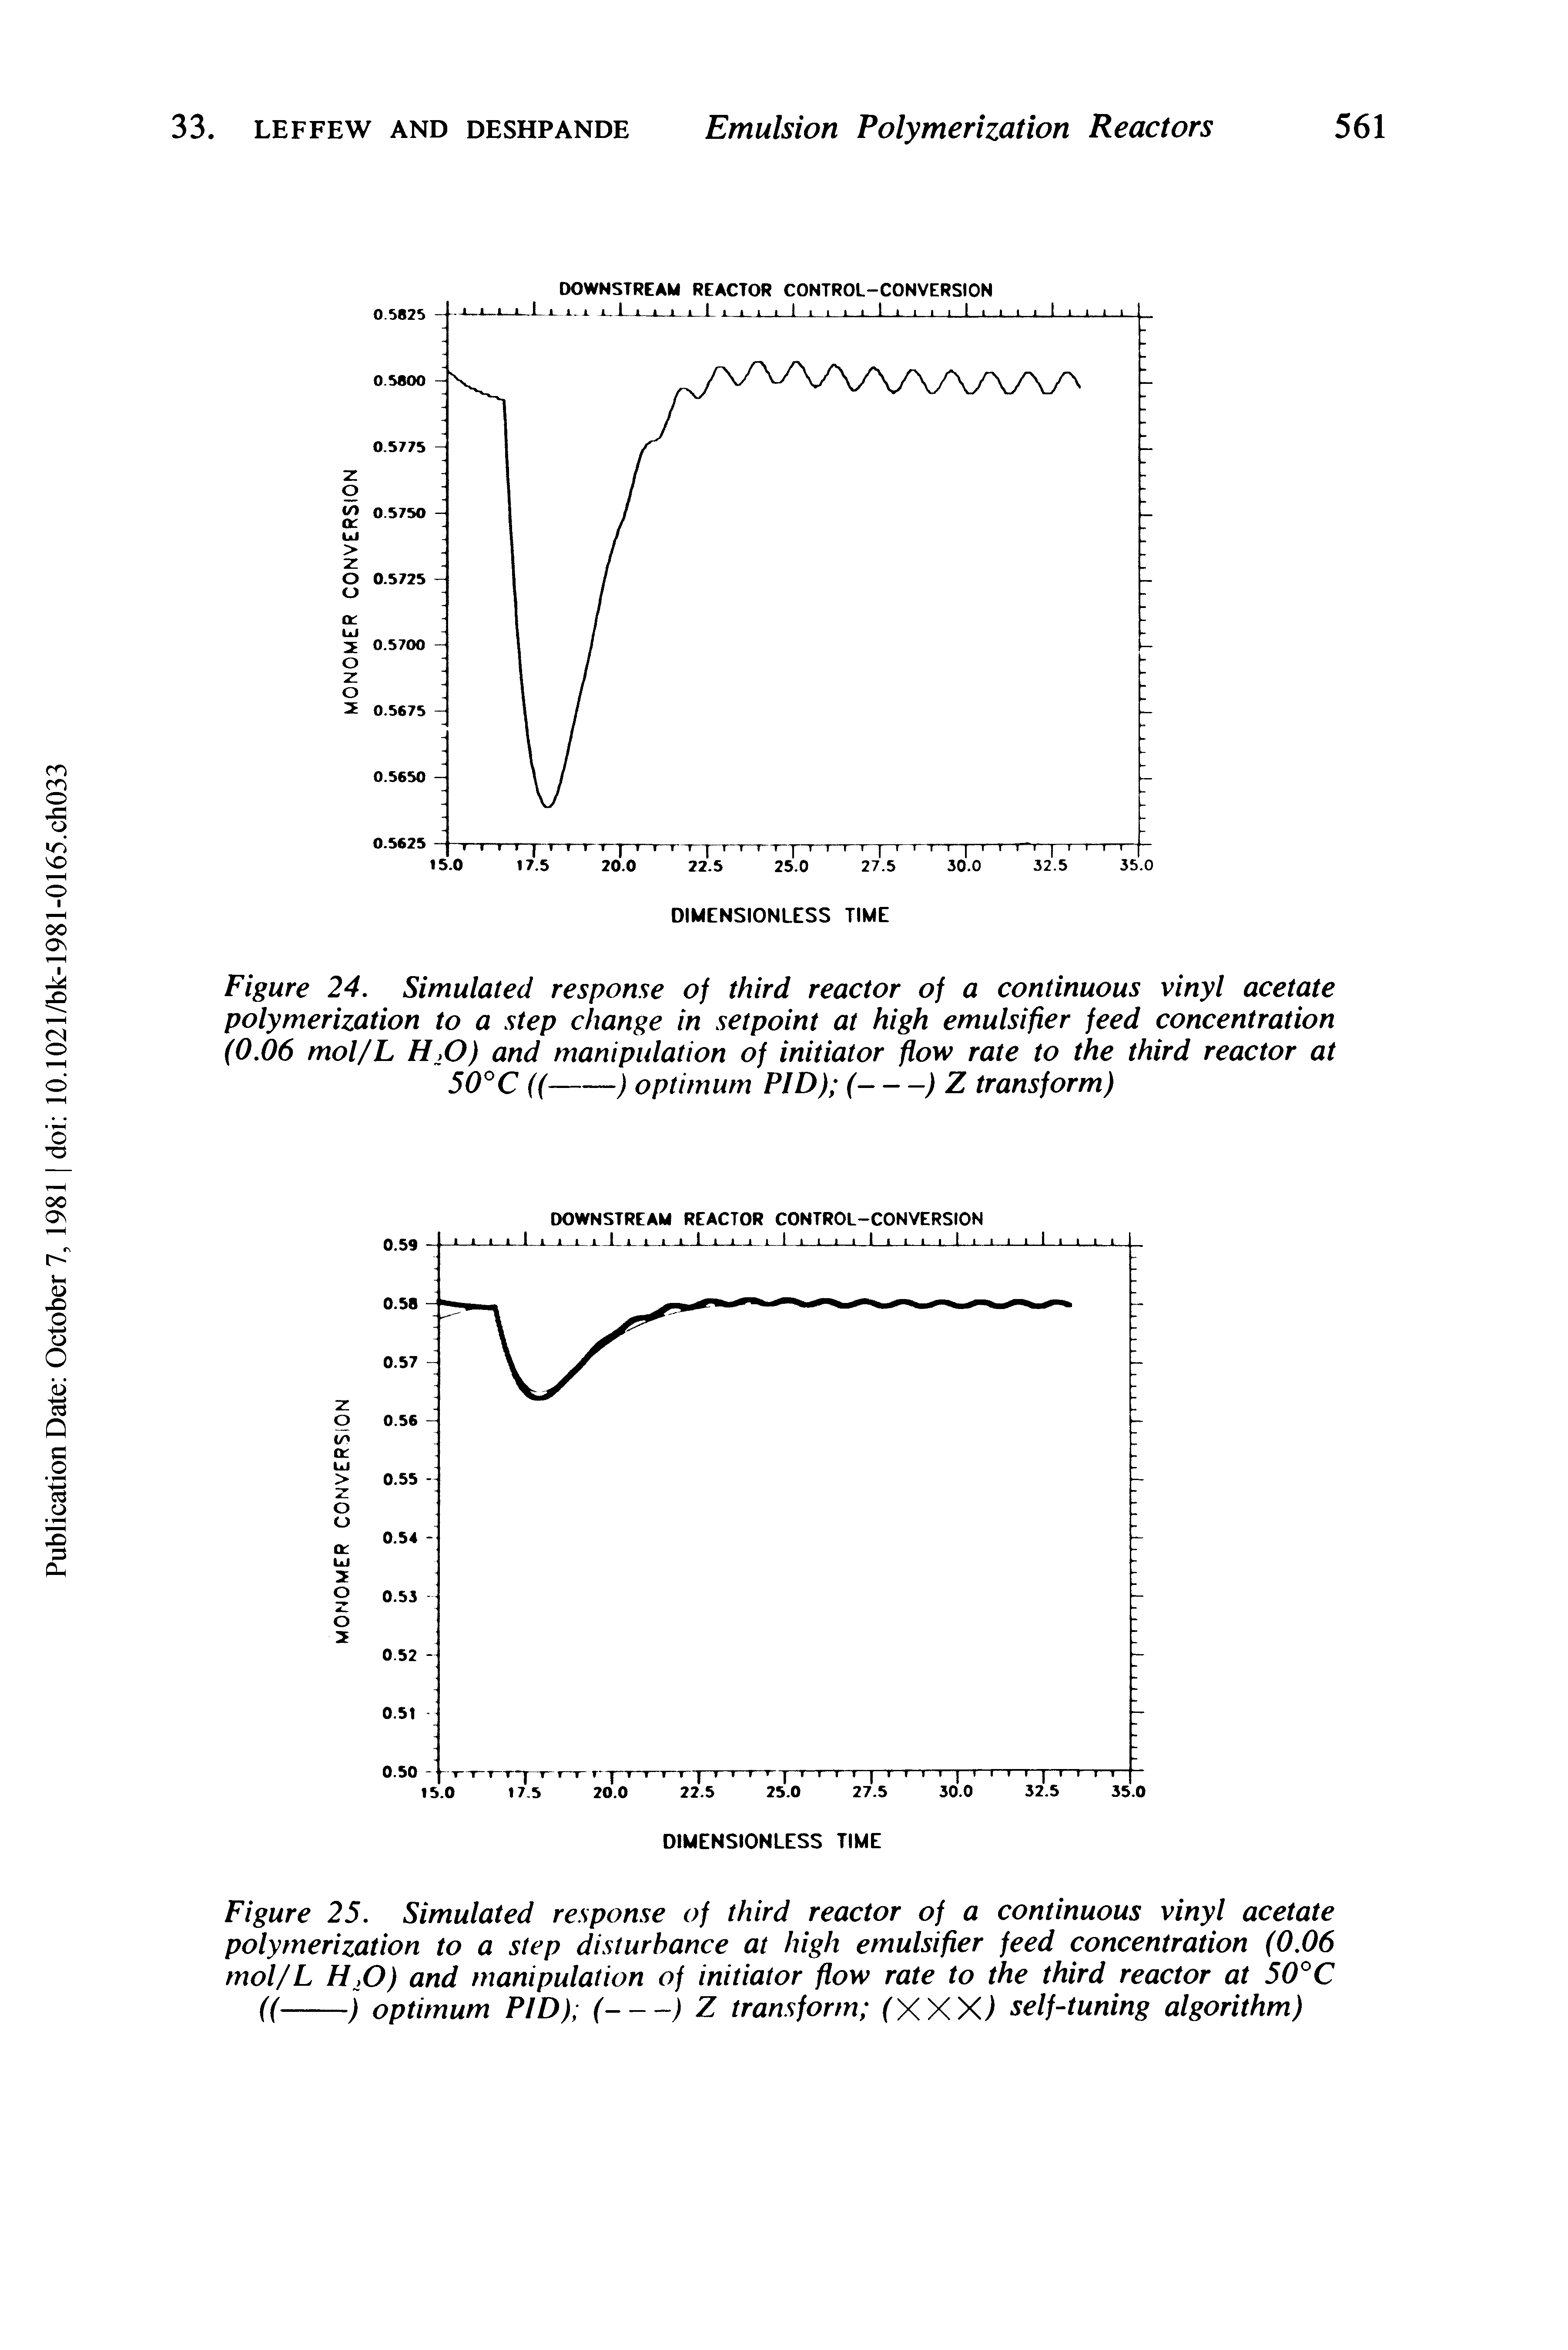 Figure 24. Simulated response of third reactor of a continuous vinyl acetate polymerization to a step change in setpoint at high emulsifier feed concentration (0.06 mol/L H>0) and manipulation of initiator flow rate to the third reactor at 50°C ((---------------------] optimum PID) (-----) Z transform)...